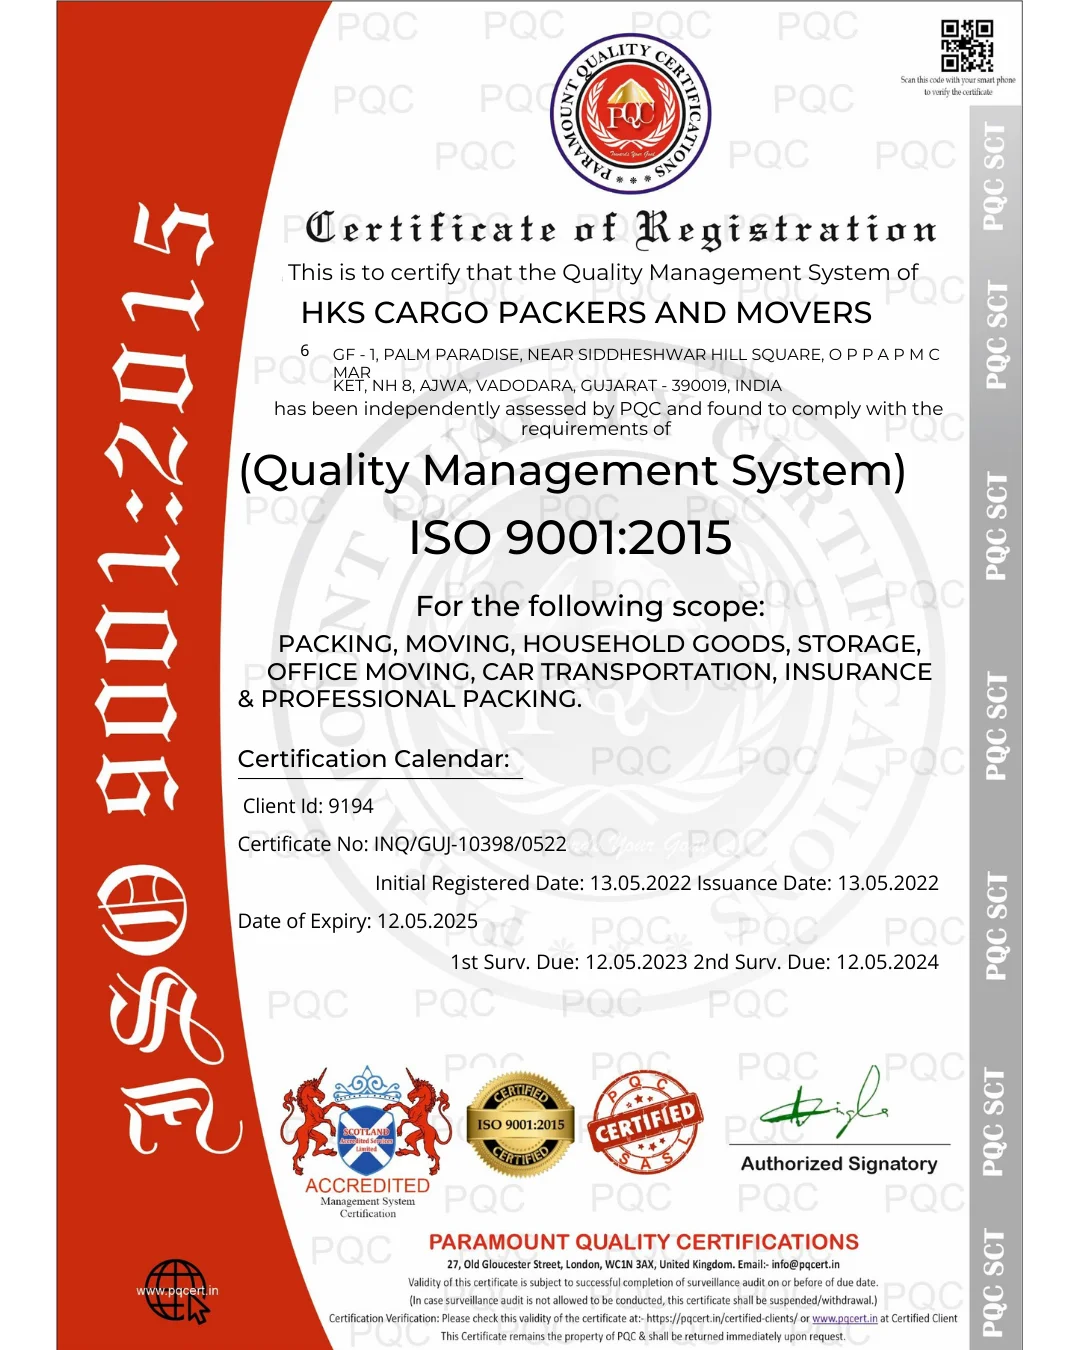 HKS Cargo Packers and Movers's ISO Registration